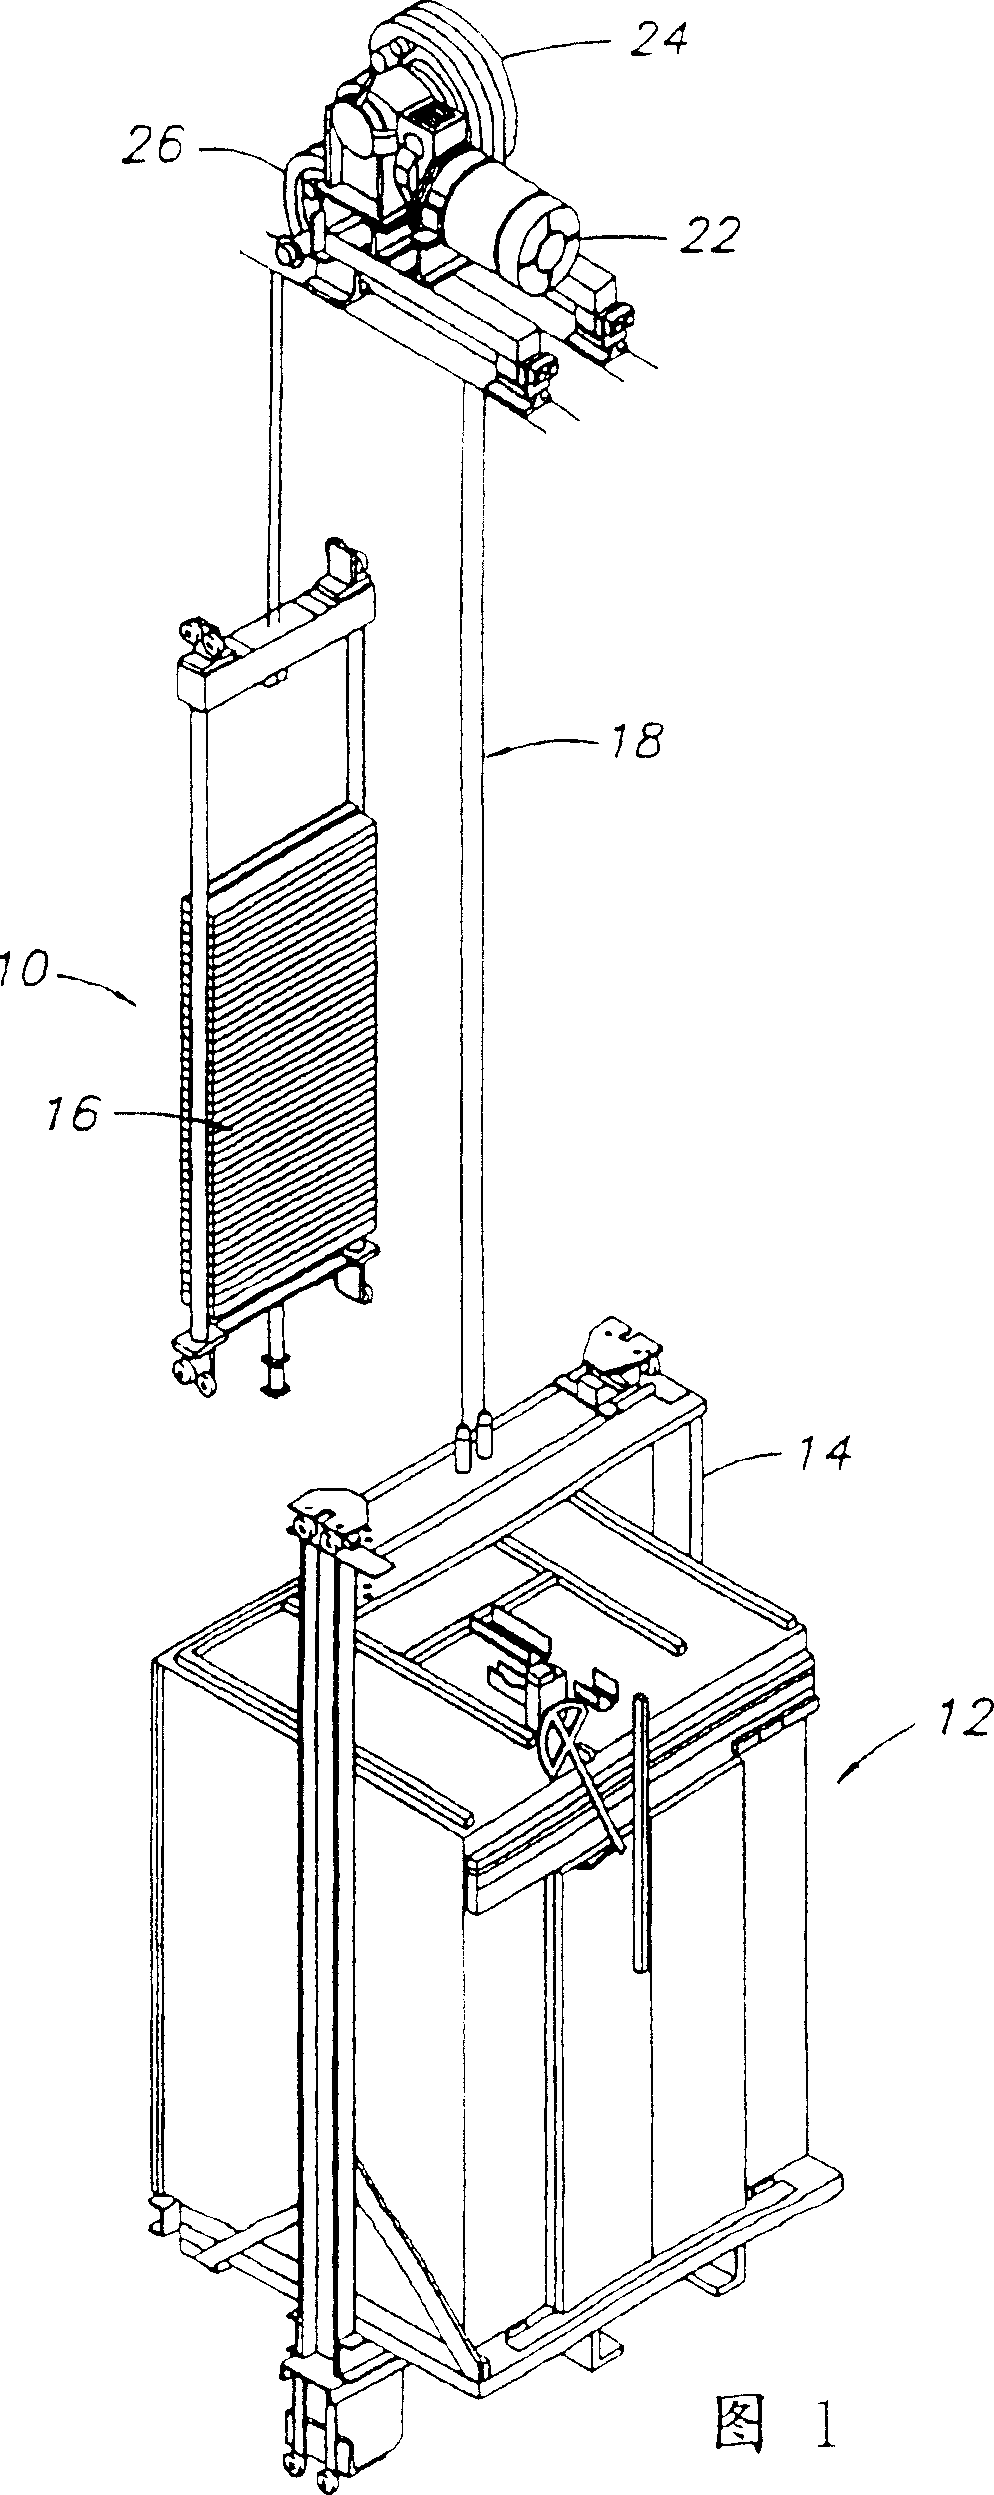 Person-carried transporting system and rope for an elevator